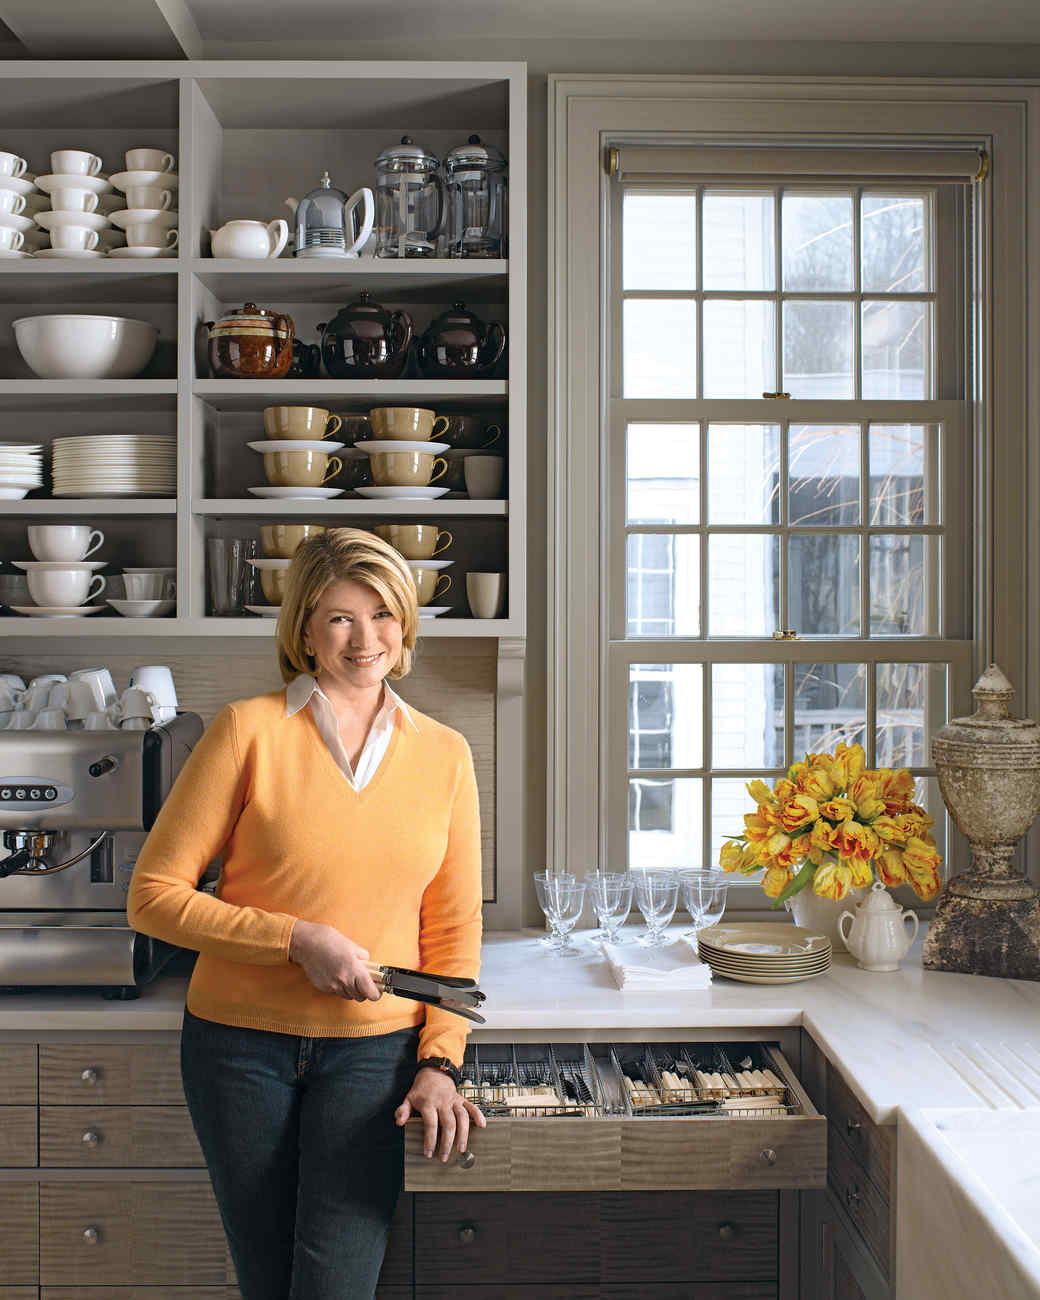 What do reviews typically say about Martha Stewart dinnerware?